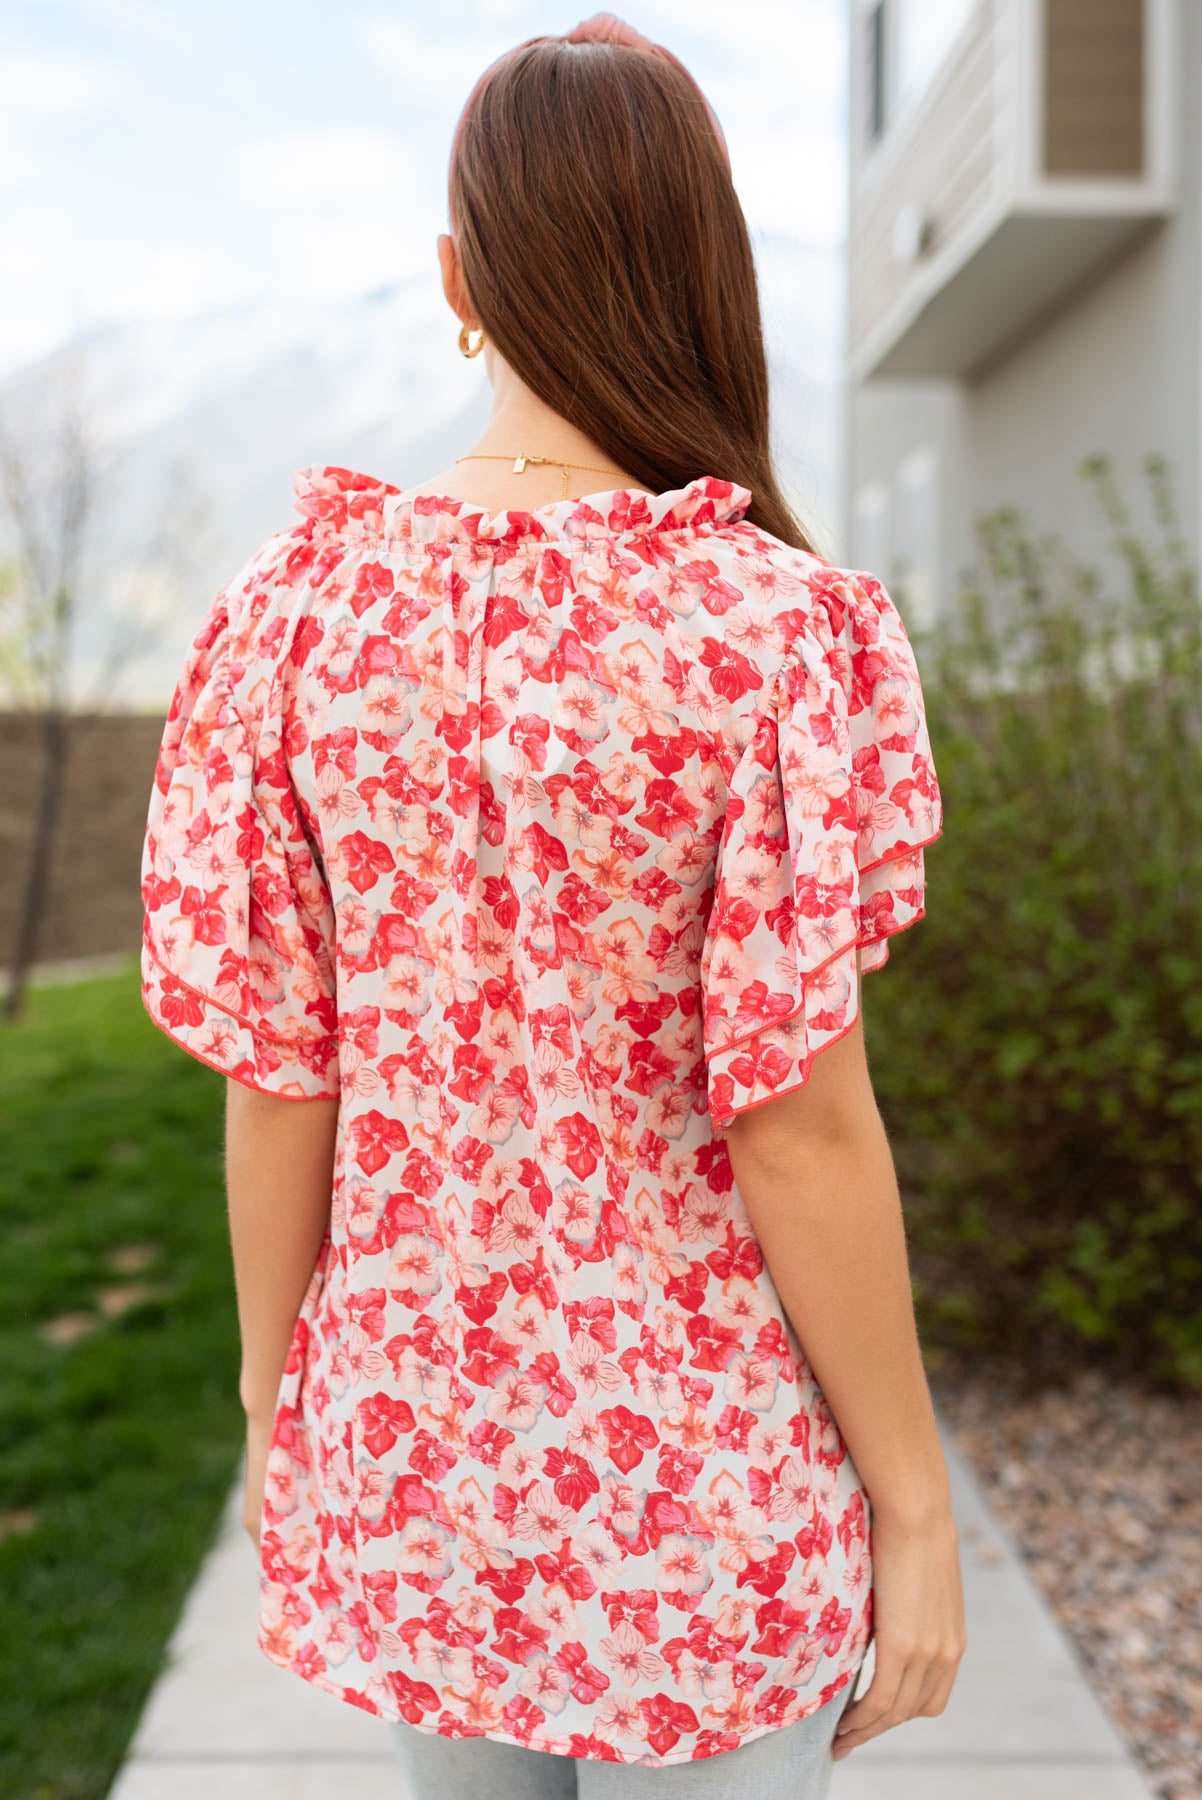 Back view of the pink floral ruffle blouse